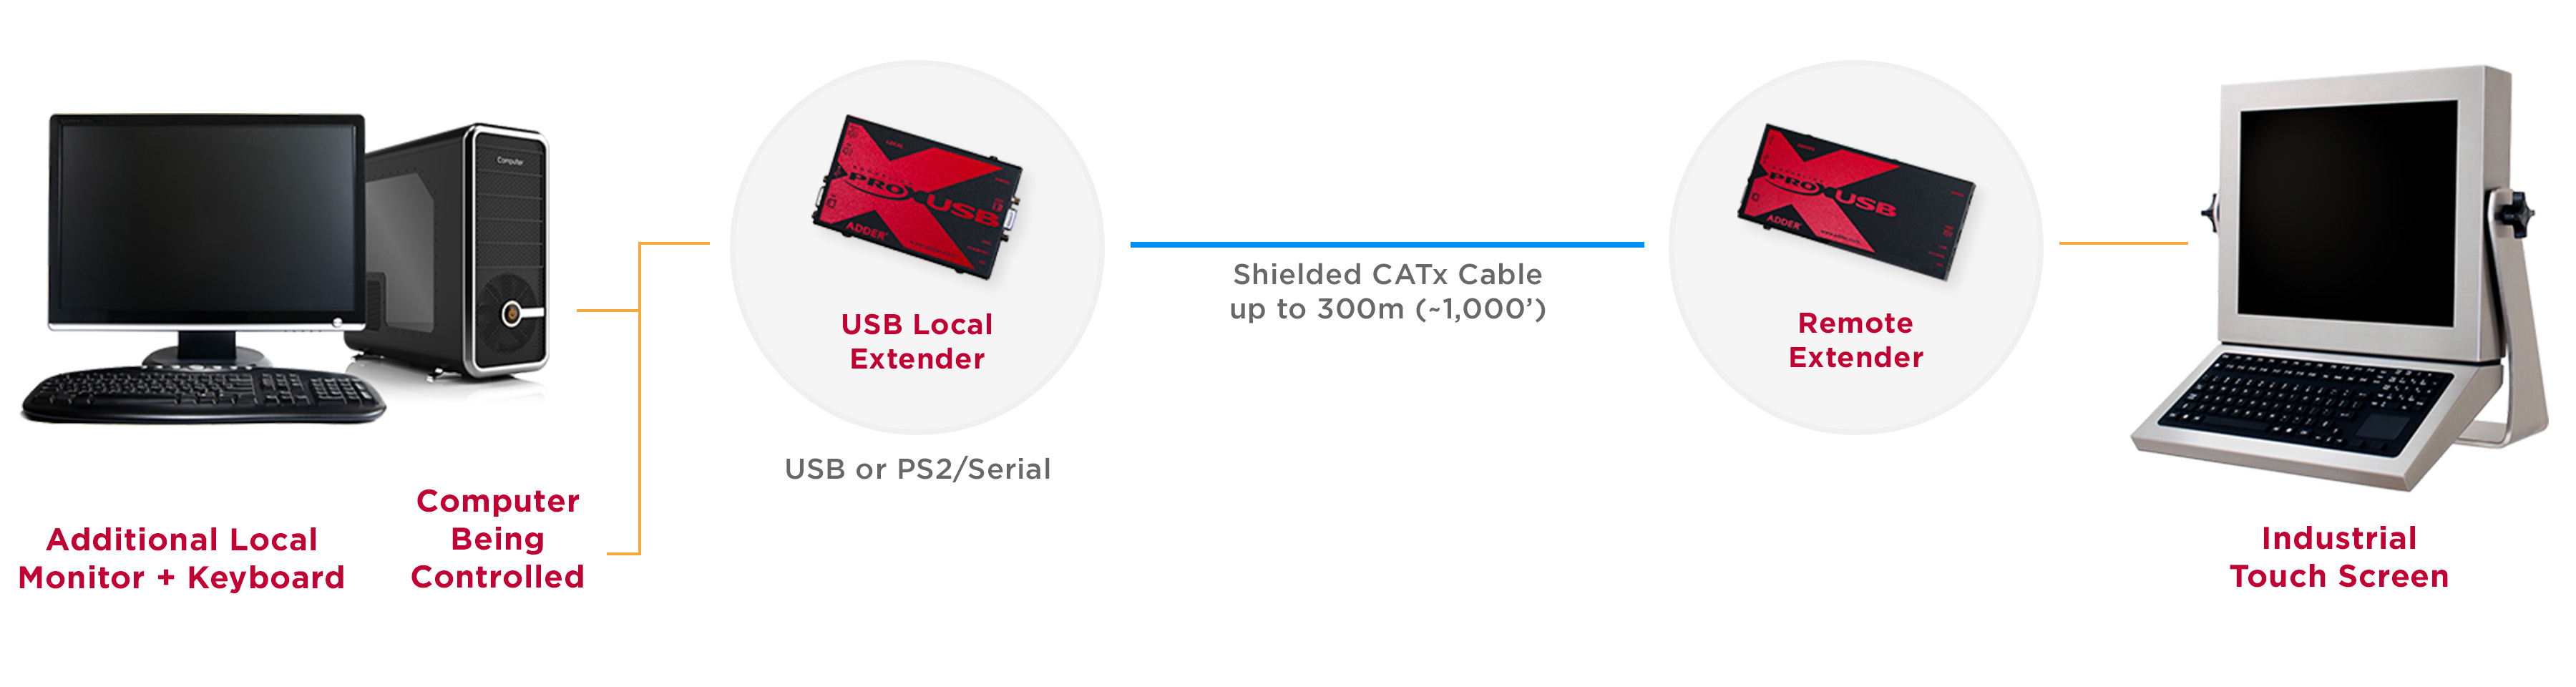 Industrial KVM Extender system diagram for 300 m (1,000') distance over shielded CATx cable